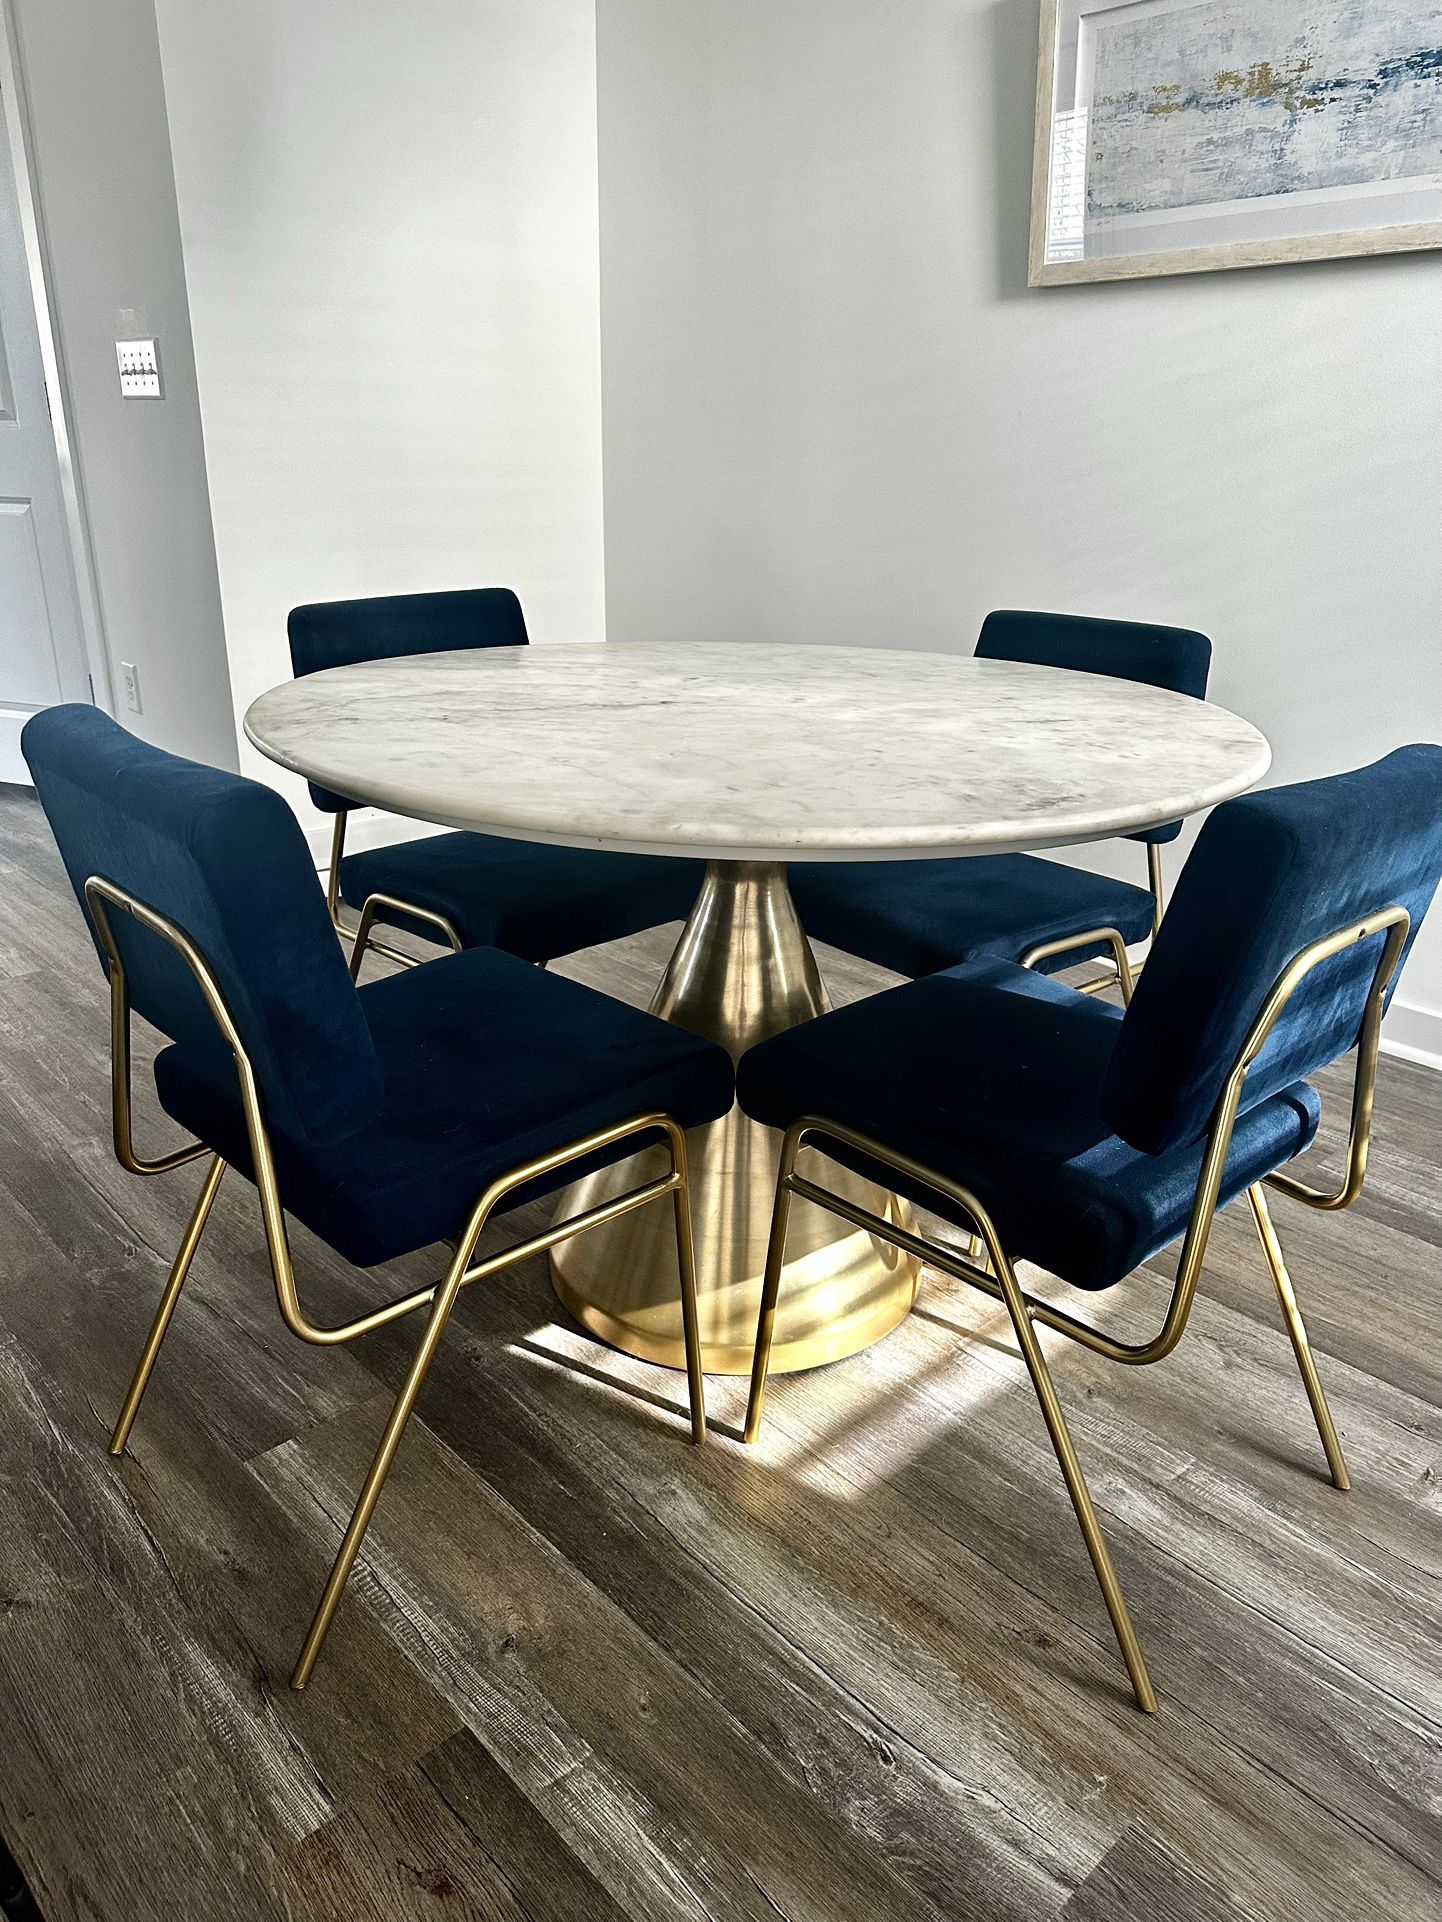 West Elm Marble Table and Blue/Gold dining chairs ($1,200 off retail)